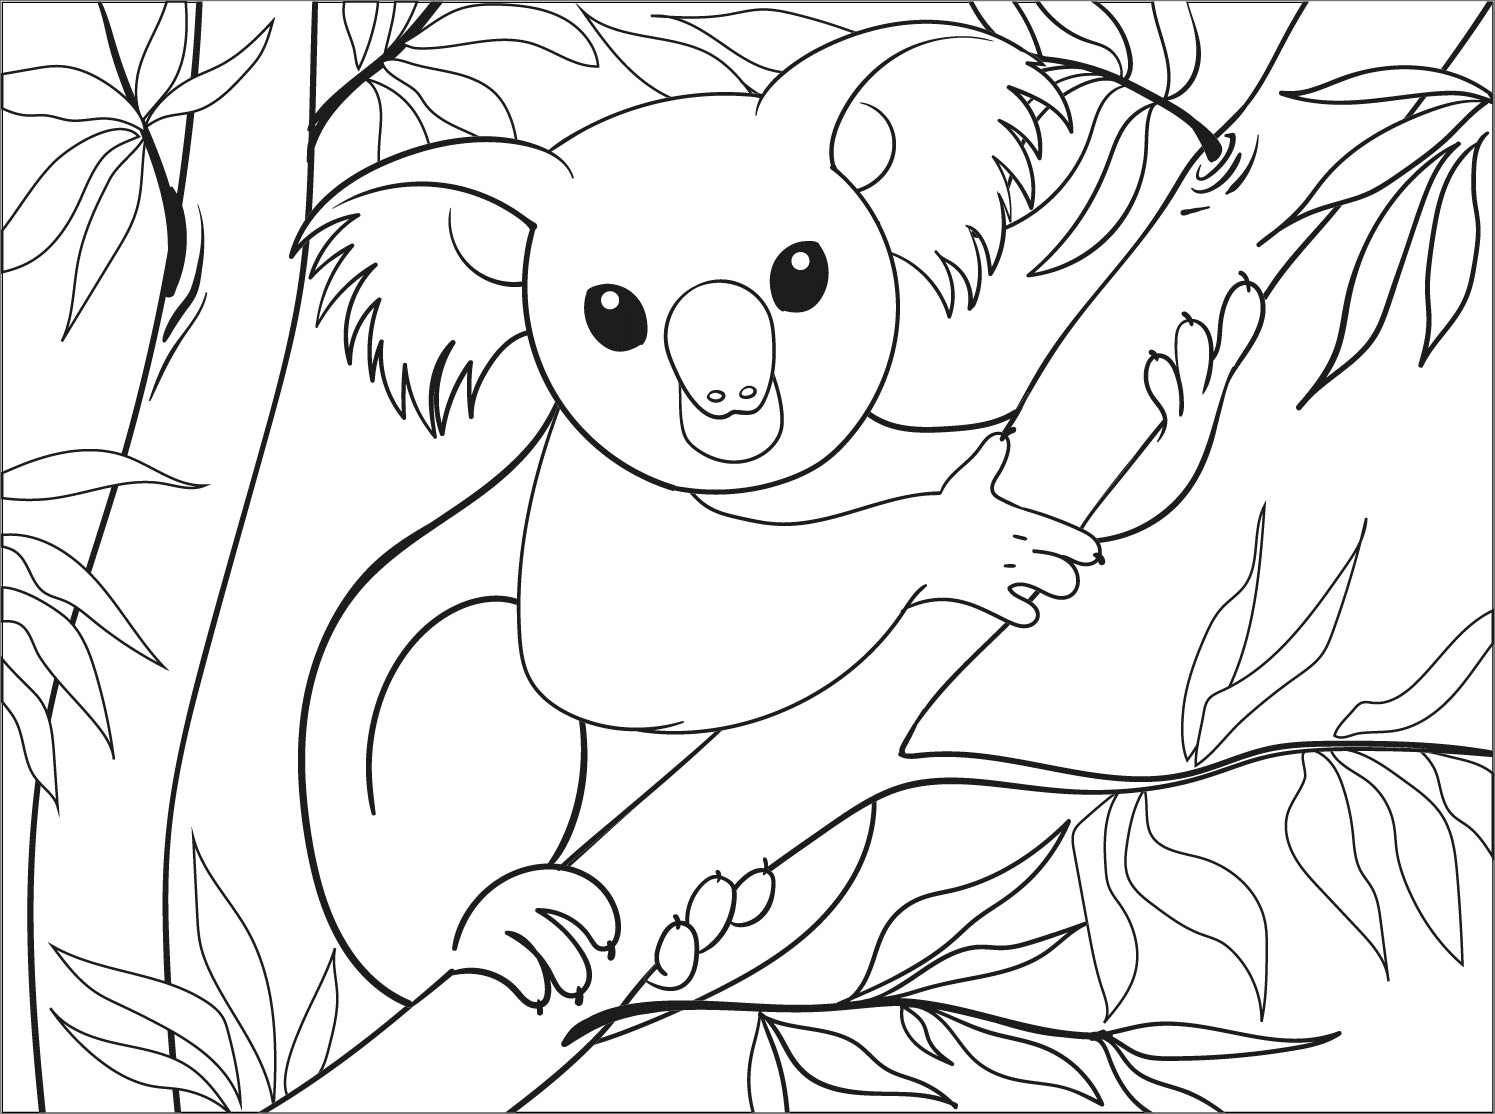 Free Koala Coloring Pages